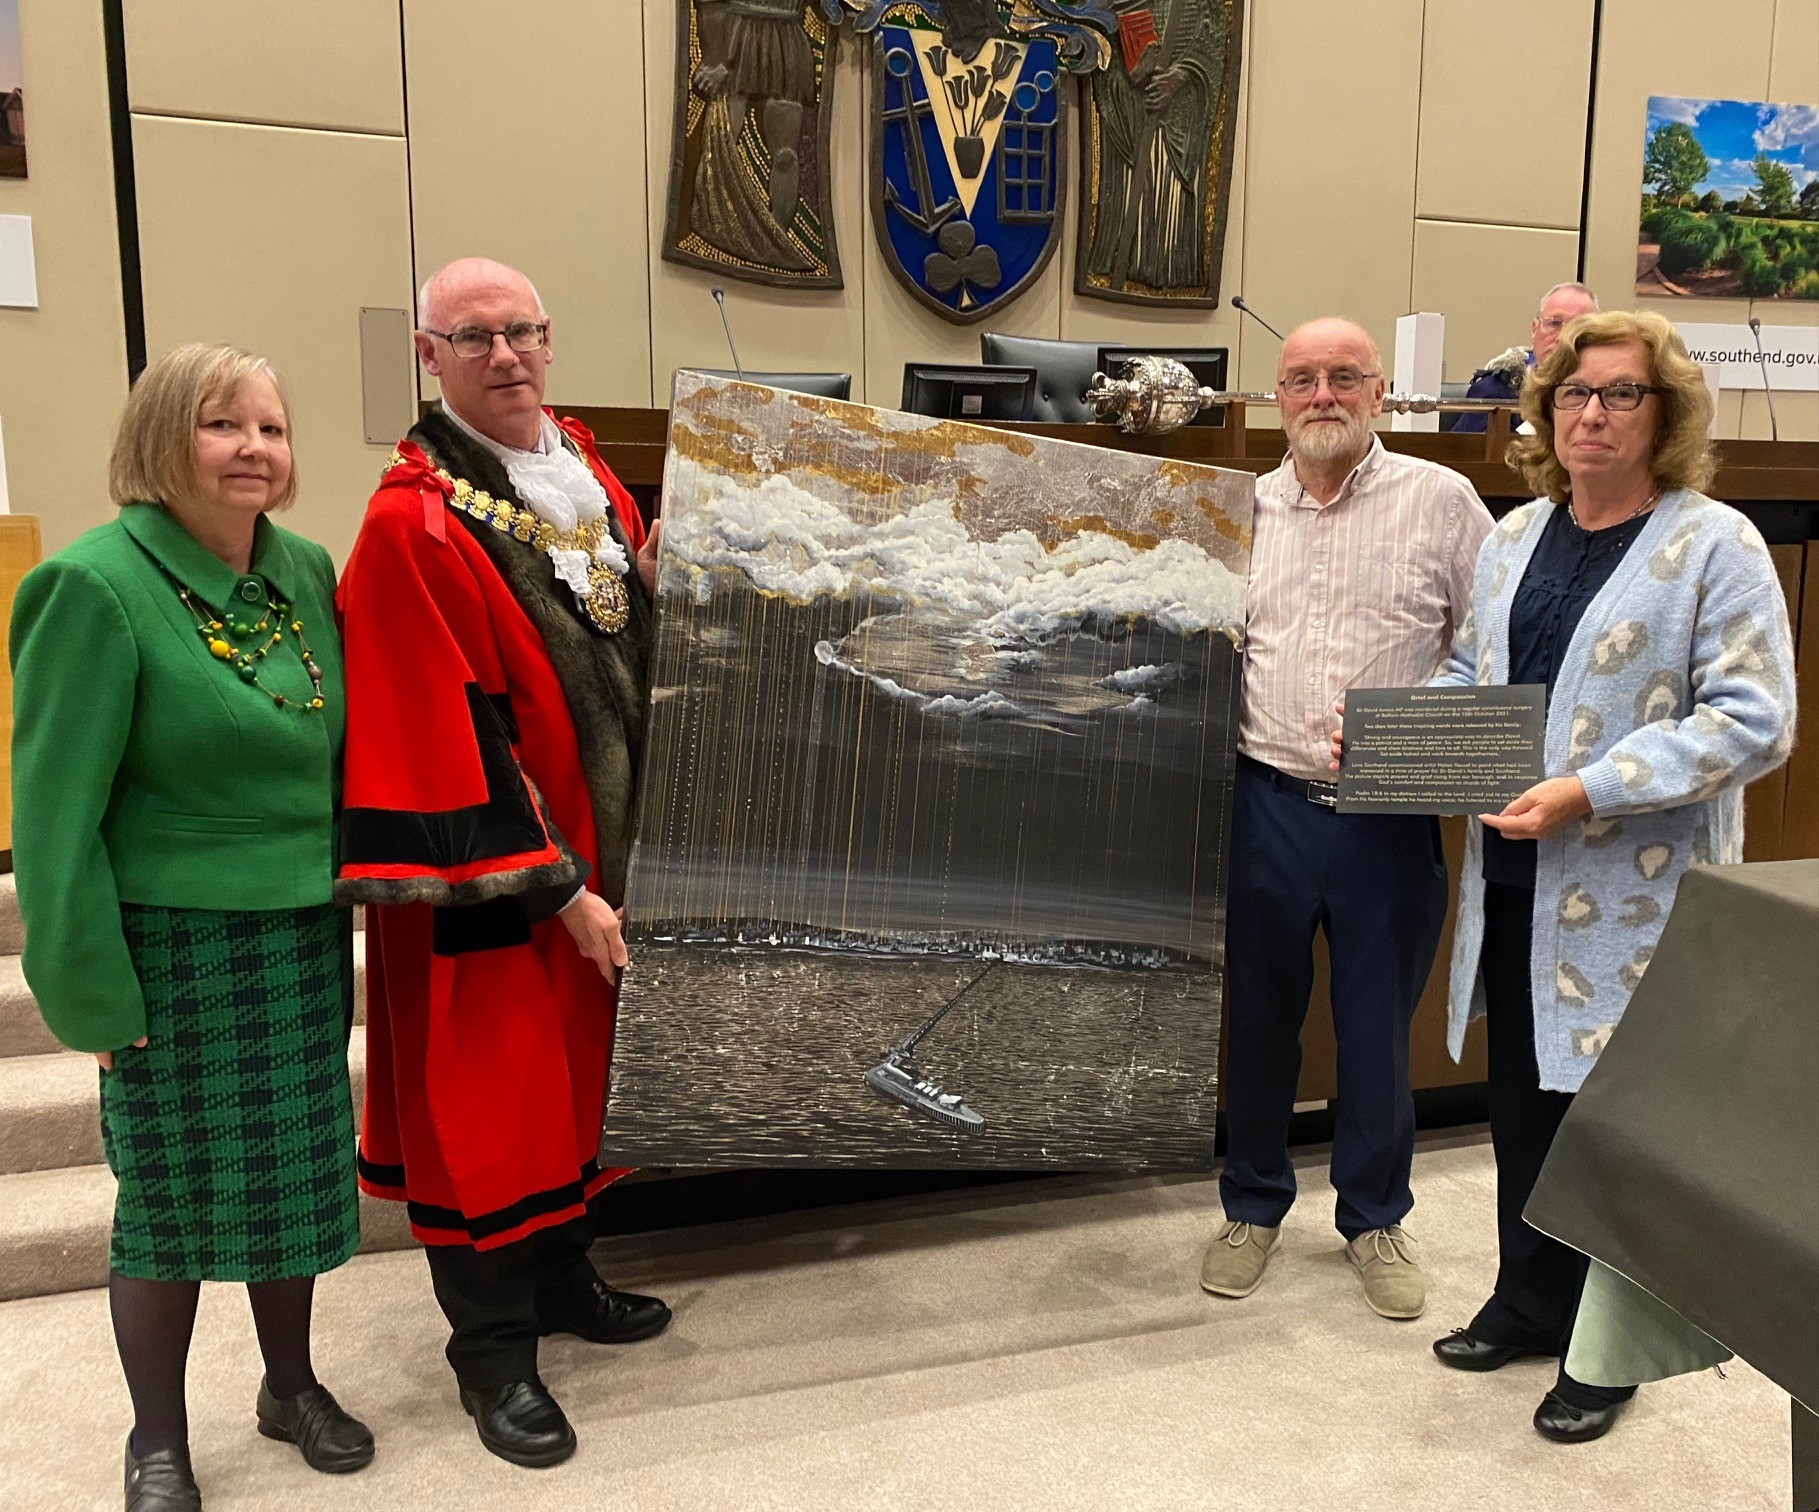 Love Southend commissioned Helen Yousaf artwork in memory of Sir David Amess presented to the City Council.